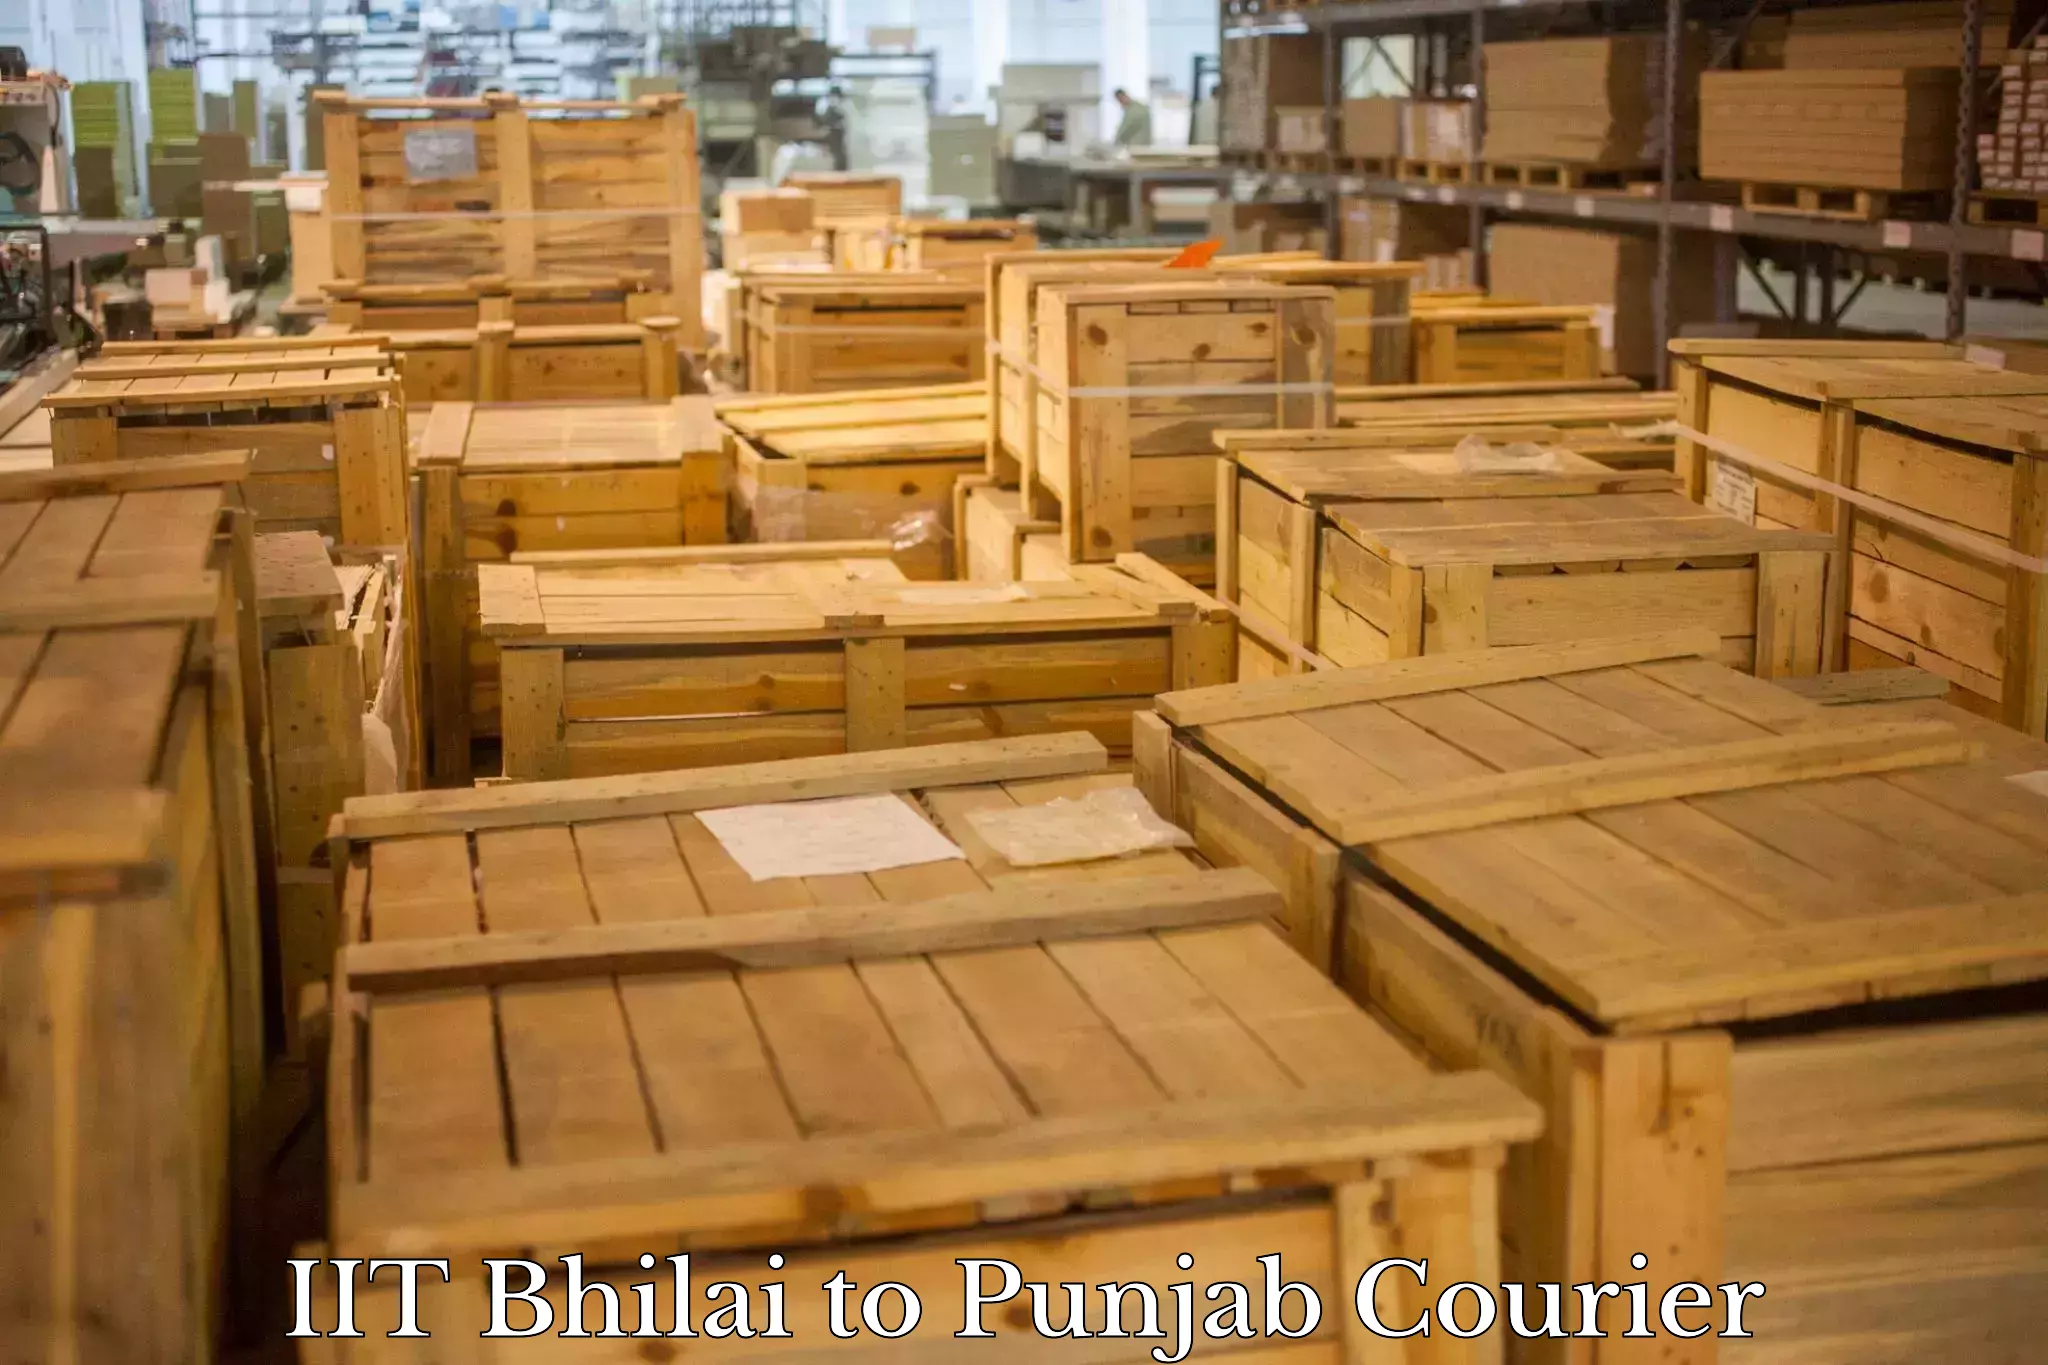 State-of-the-art courier technology IIT Bhilai to Jhunir